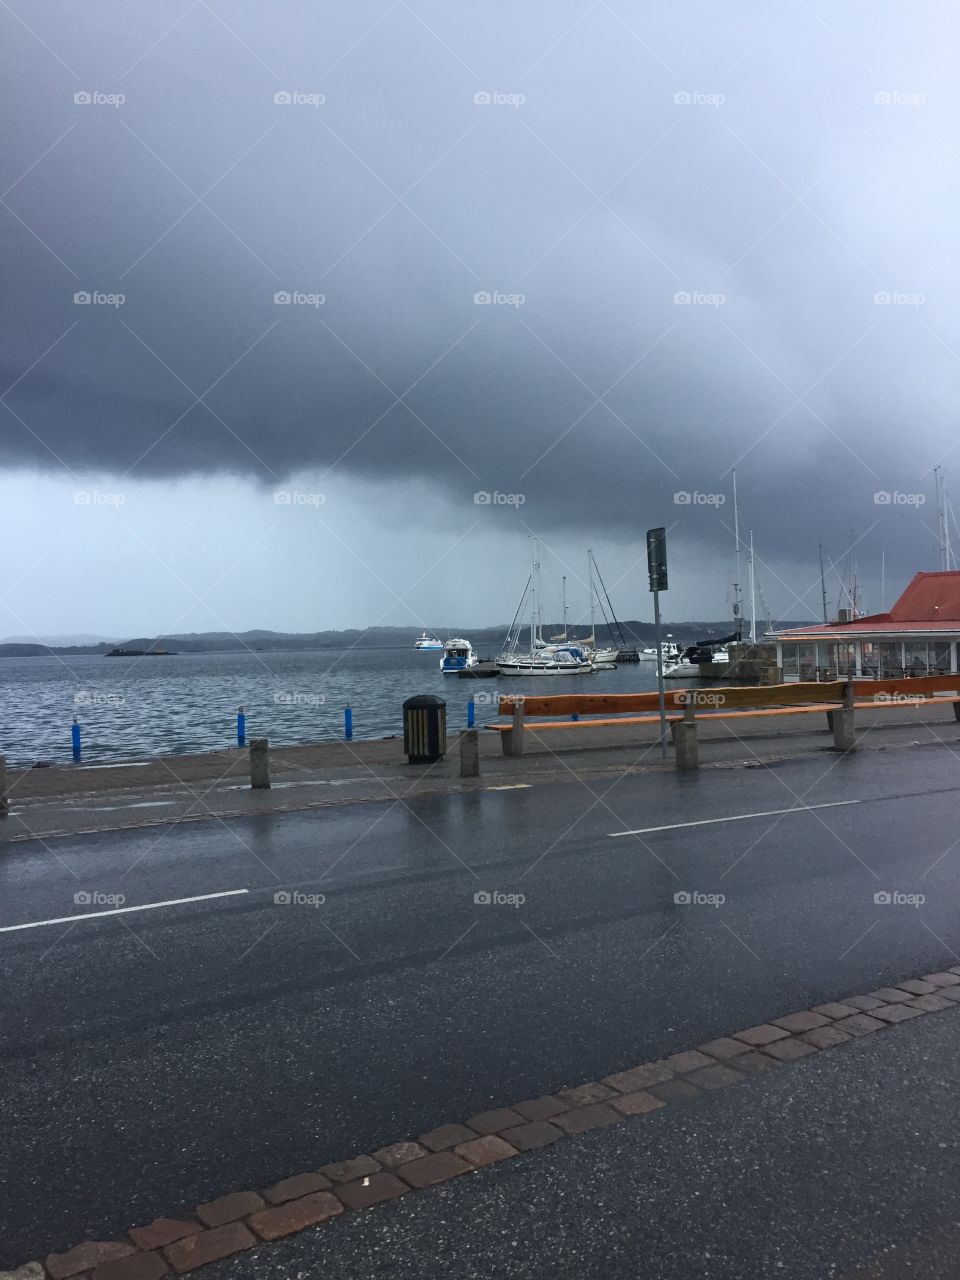 Rainy weather over Lysekil, Sweden